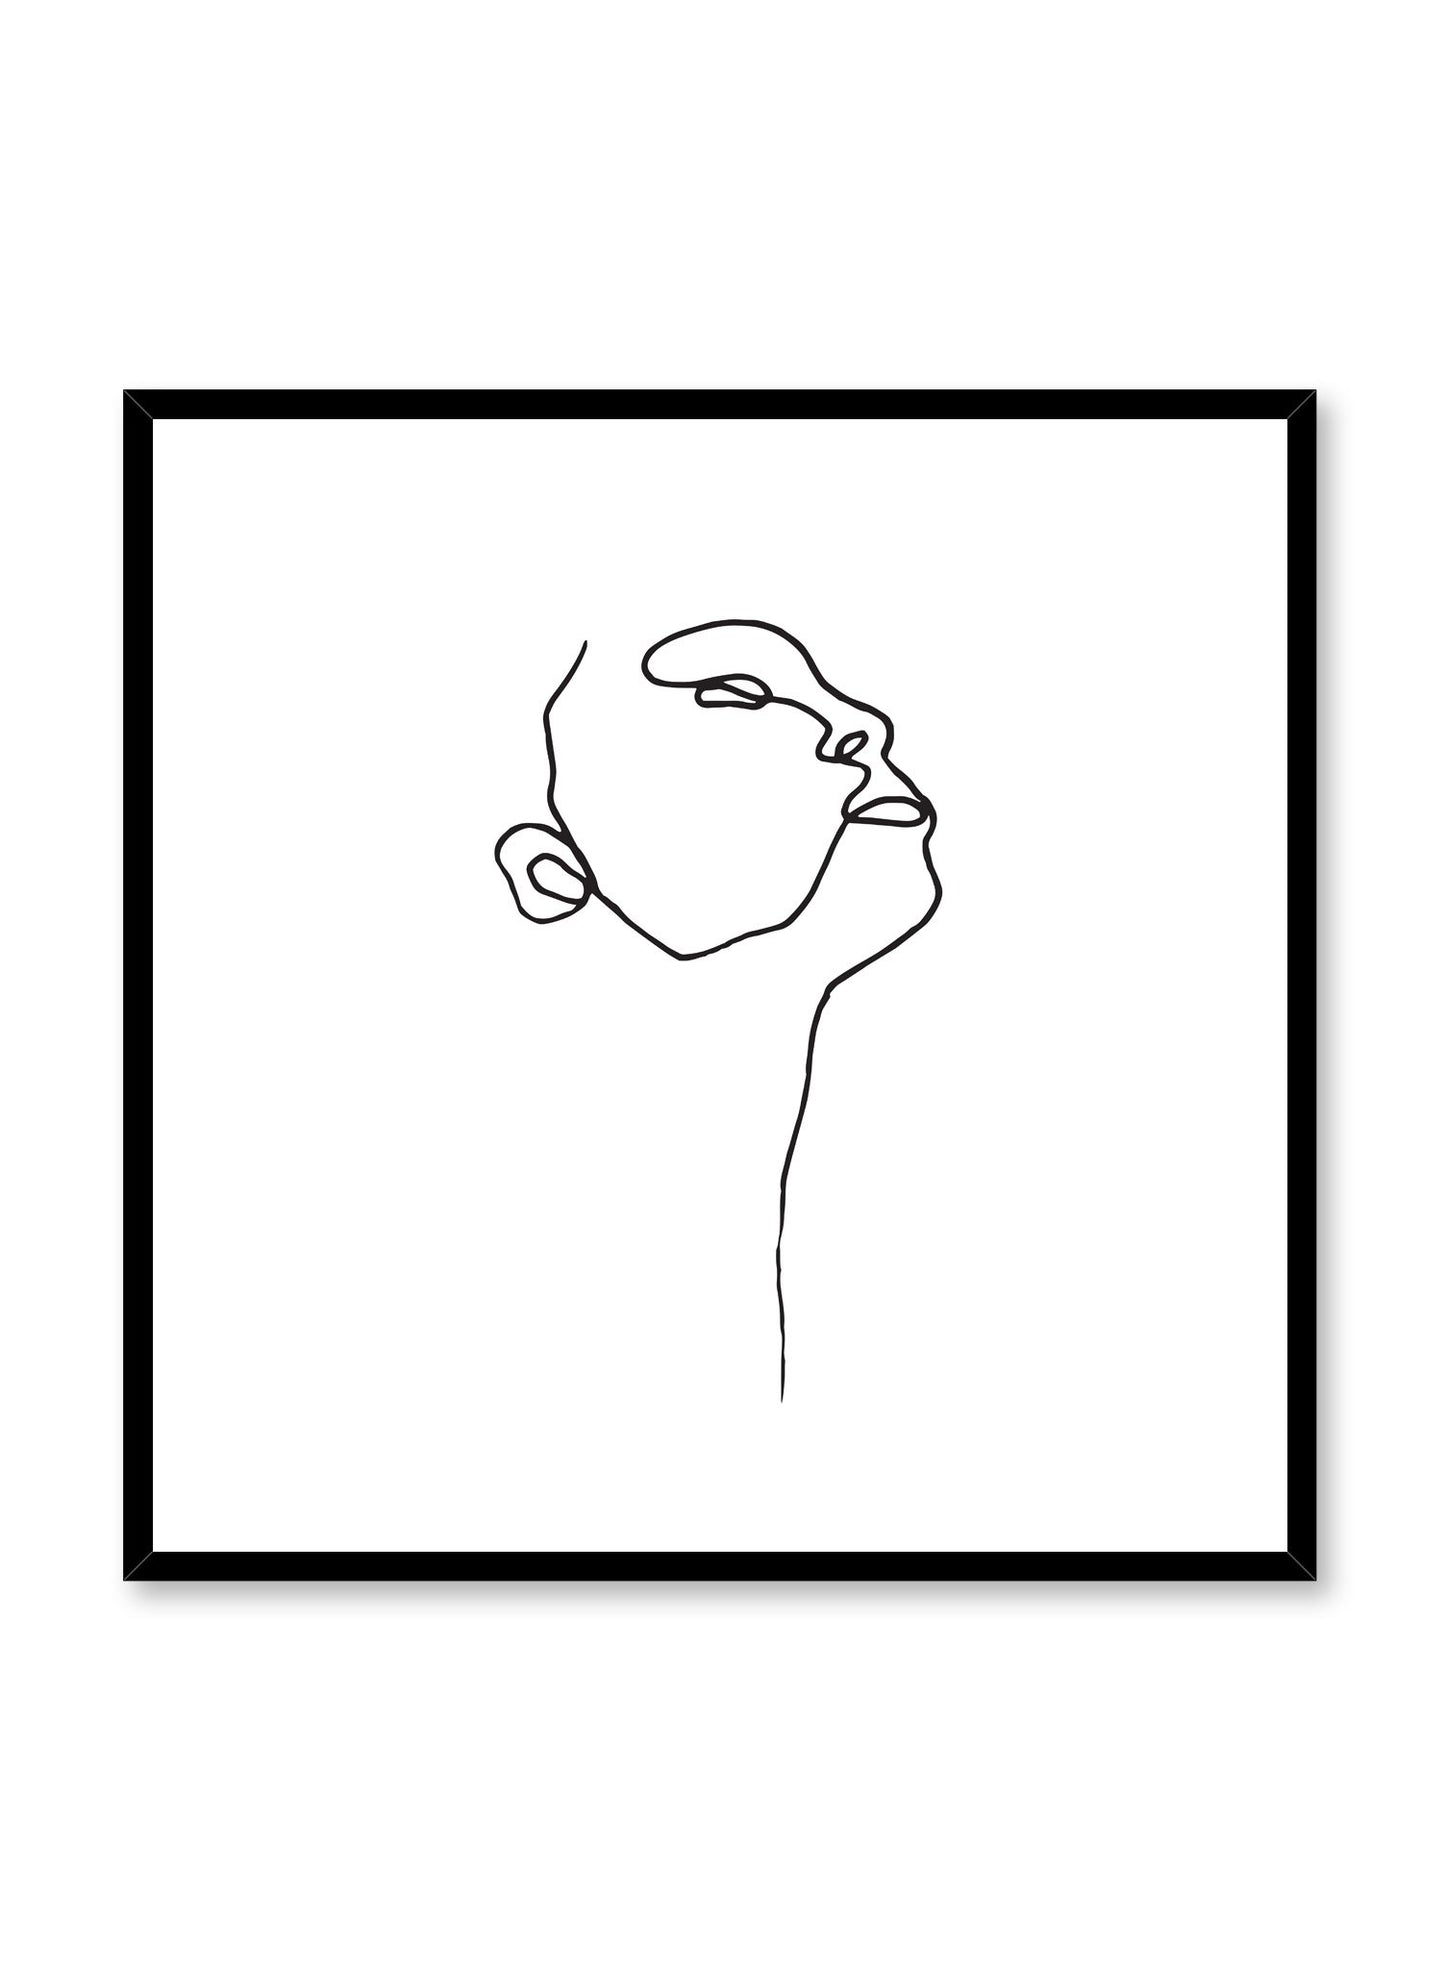 Modern minimalist poster by Opposite Wall with abstract illustration of Profile in square format